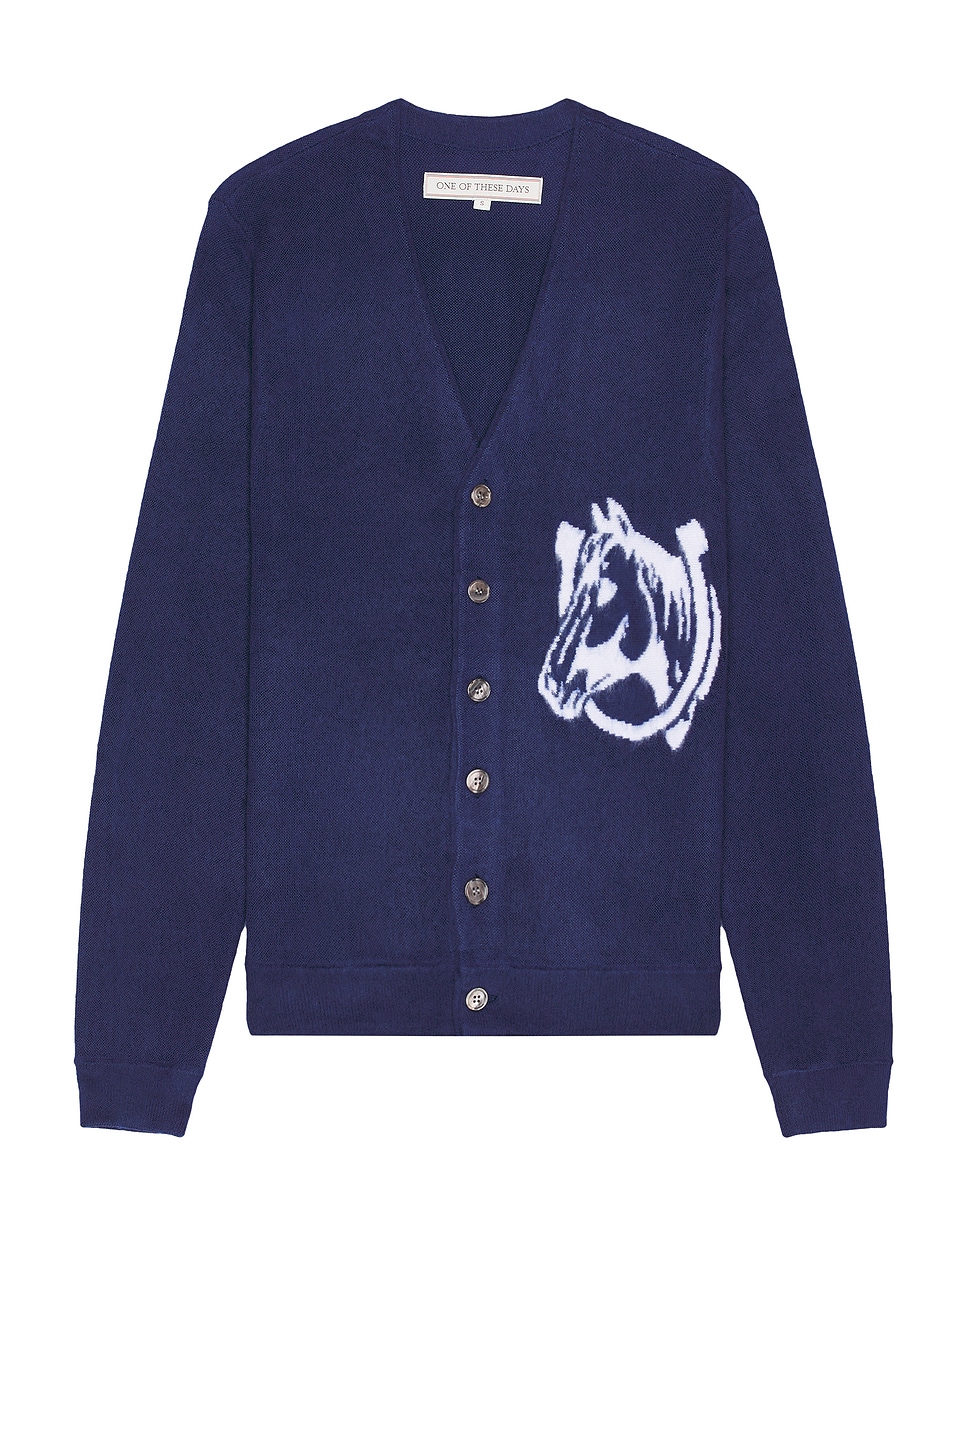 Image 1 of ONE OF THESE DAYS Collegiate Cardigan in Navy